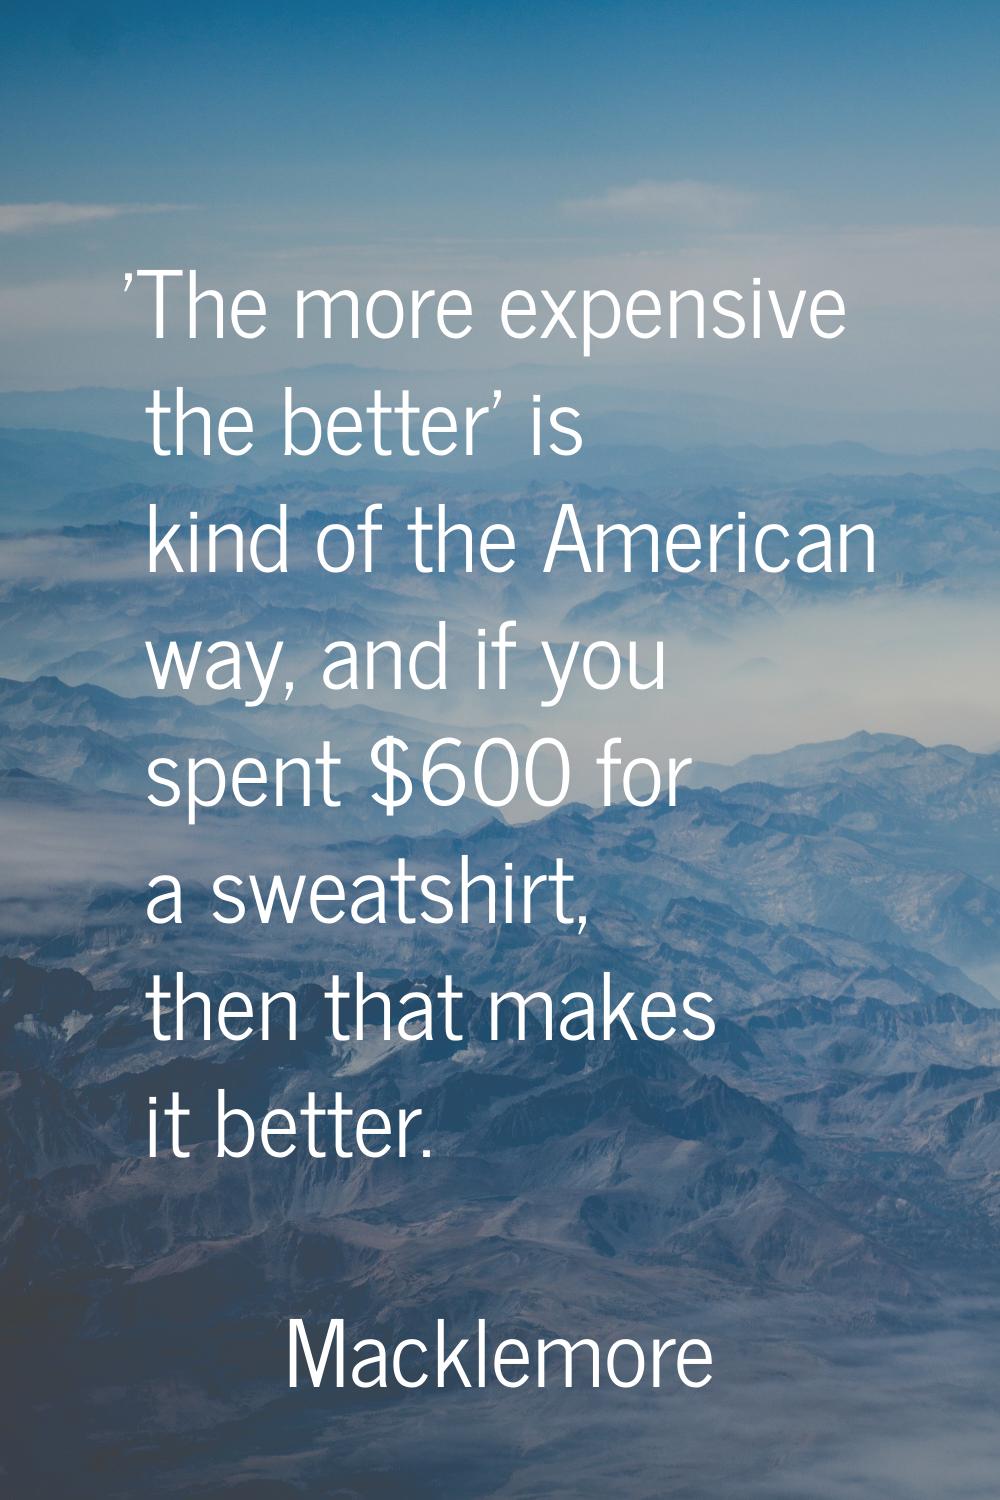 'The more expensive the better' is kind of the American way, and if you spent $600 for a sweatshirt